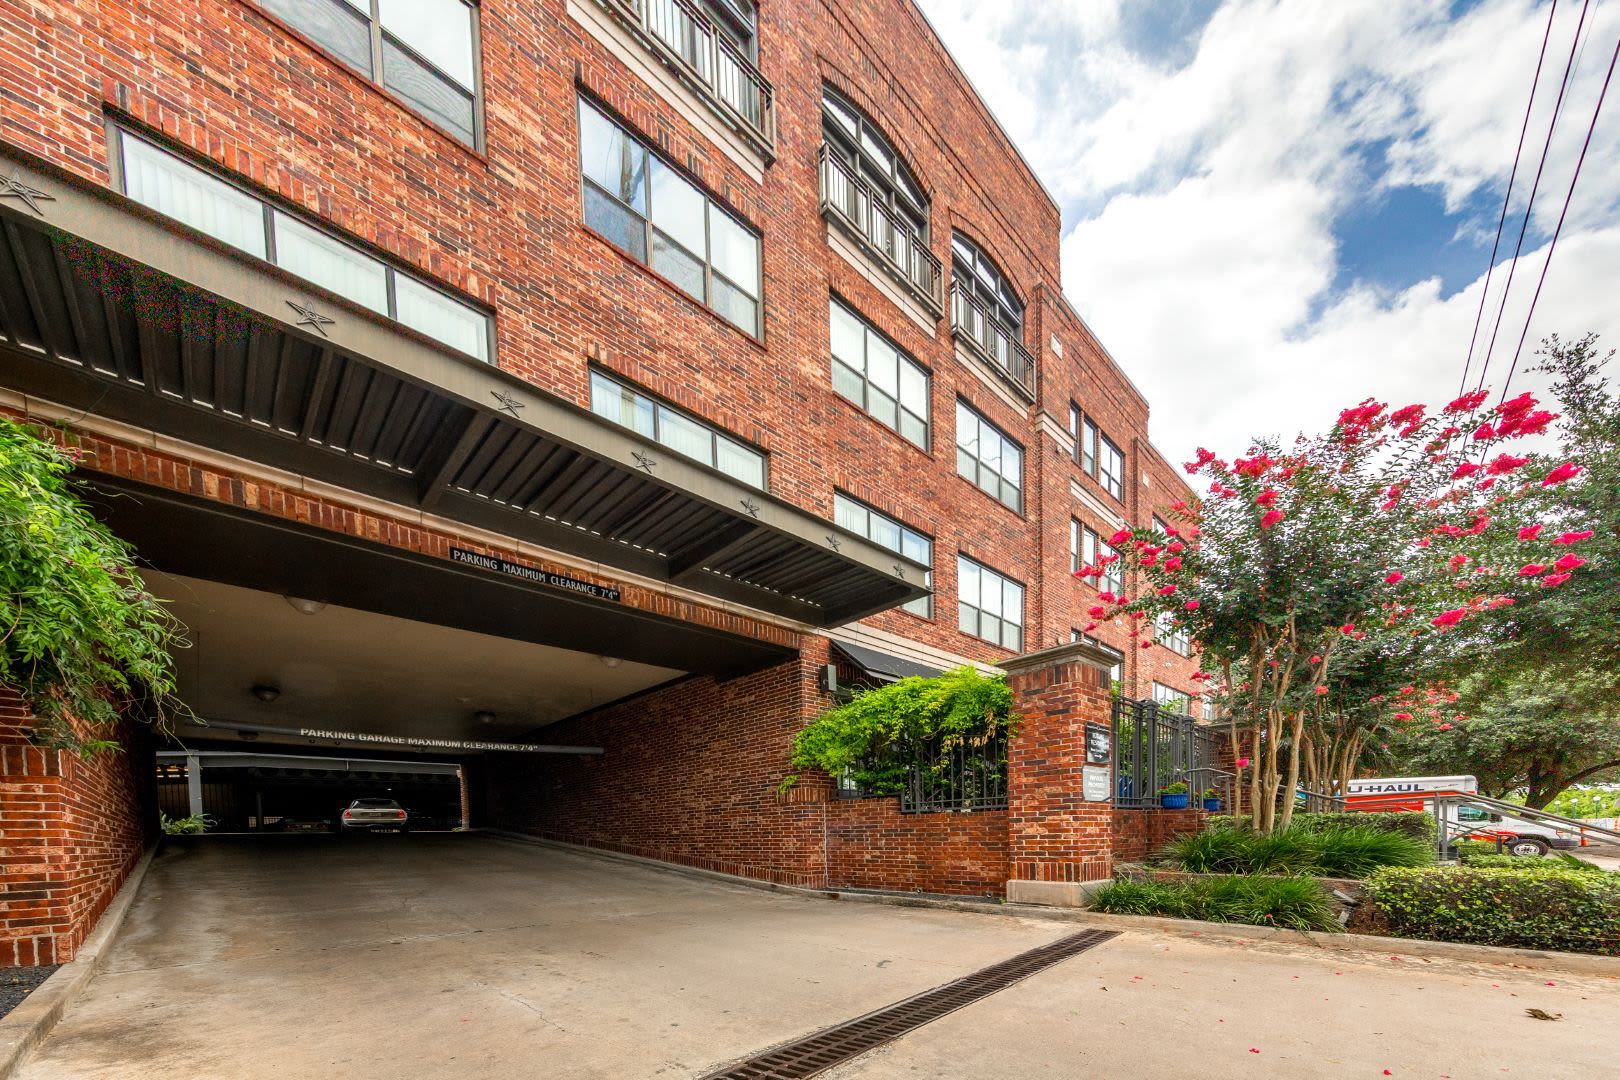 Parking garage entrance at Marquis Lofts on Sabine in Houston, Texas